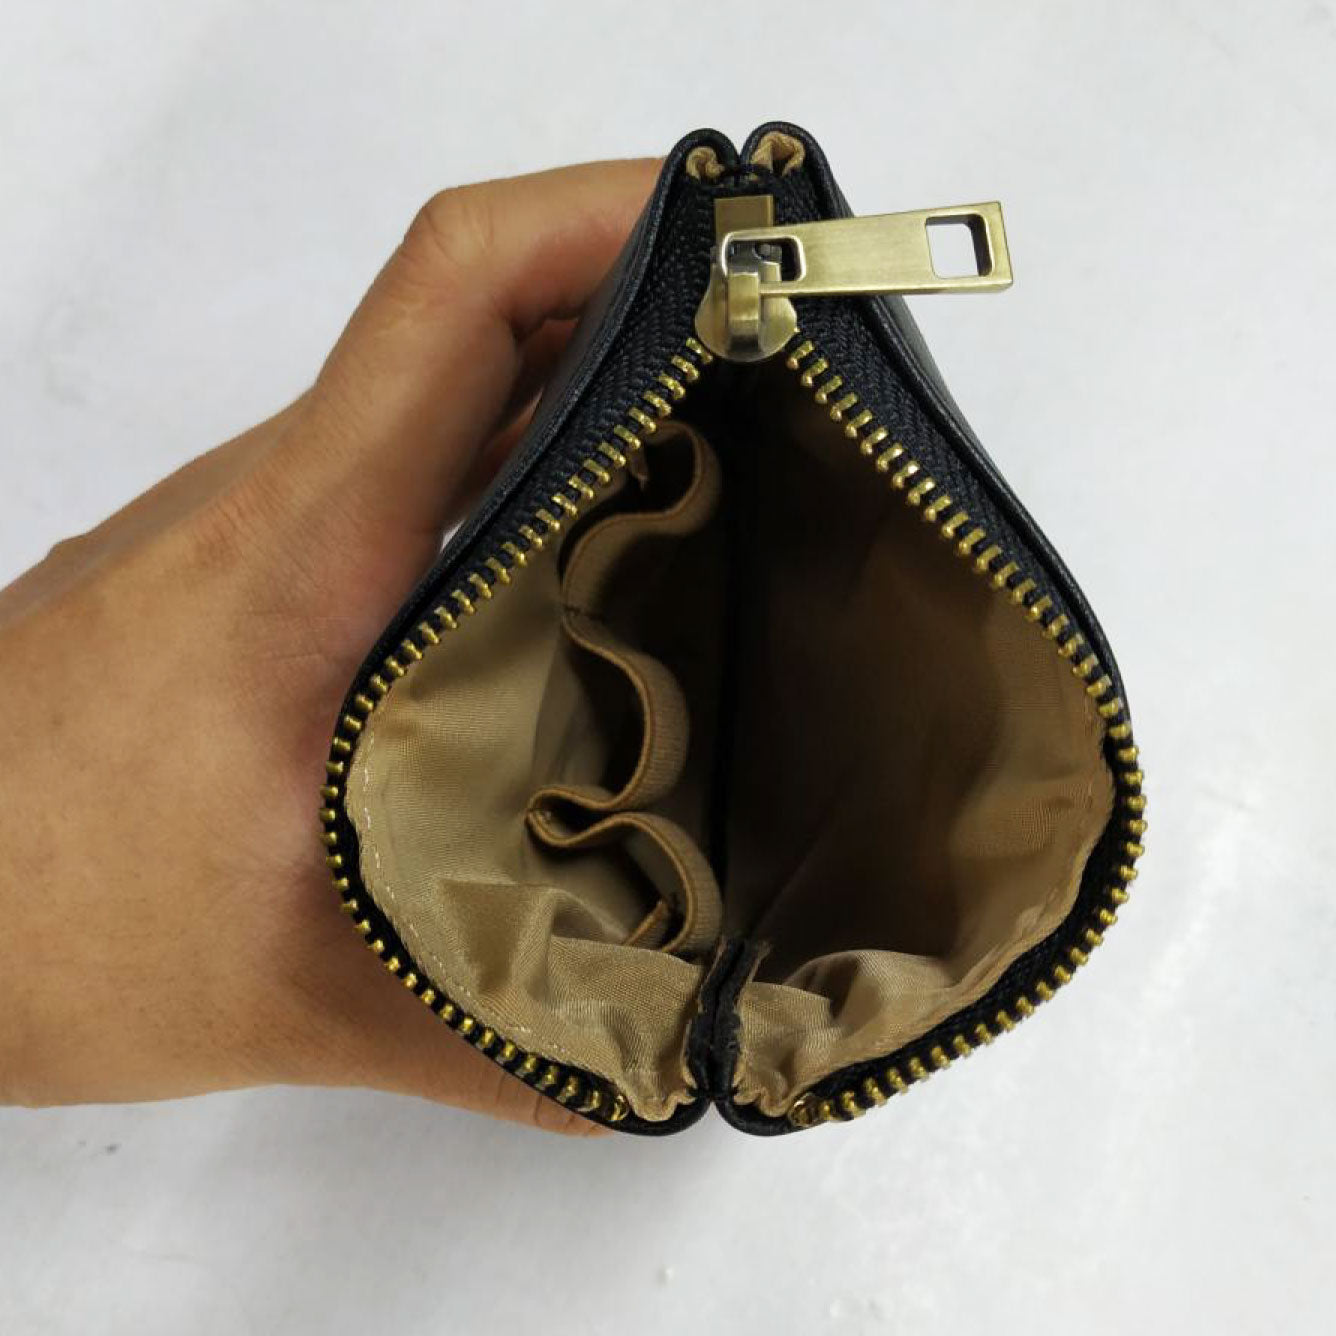 Buy Oil Tan Leather Purse Online in India - Etsy